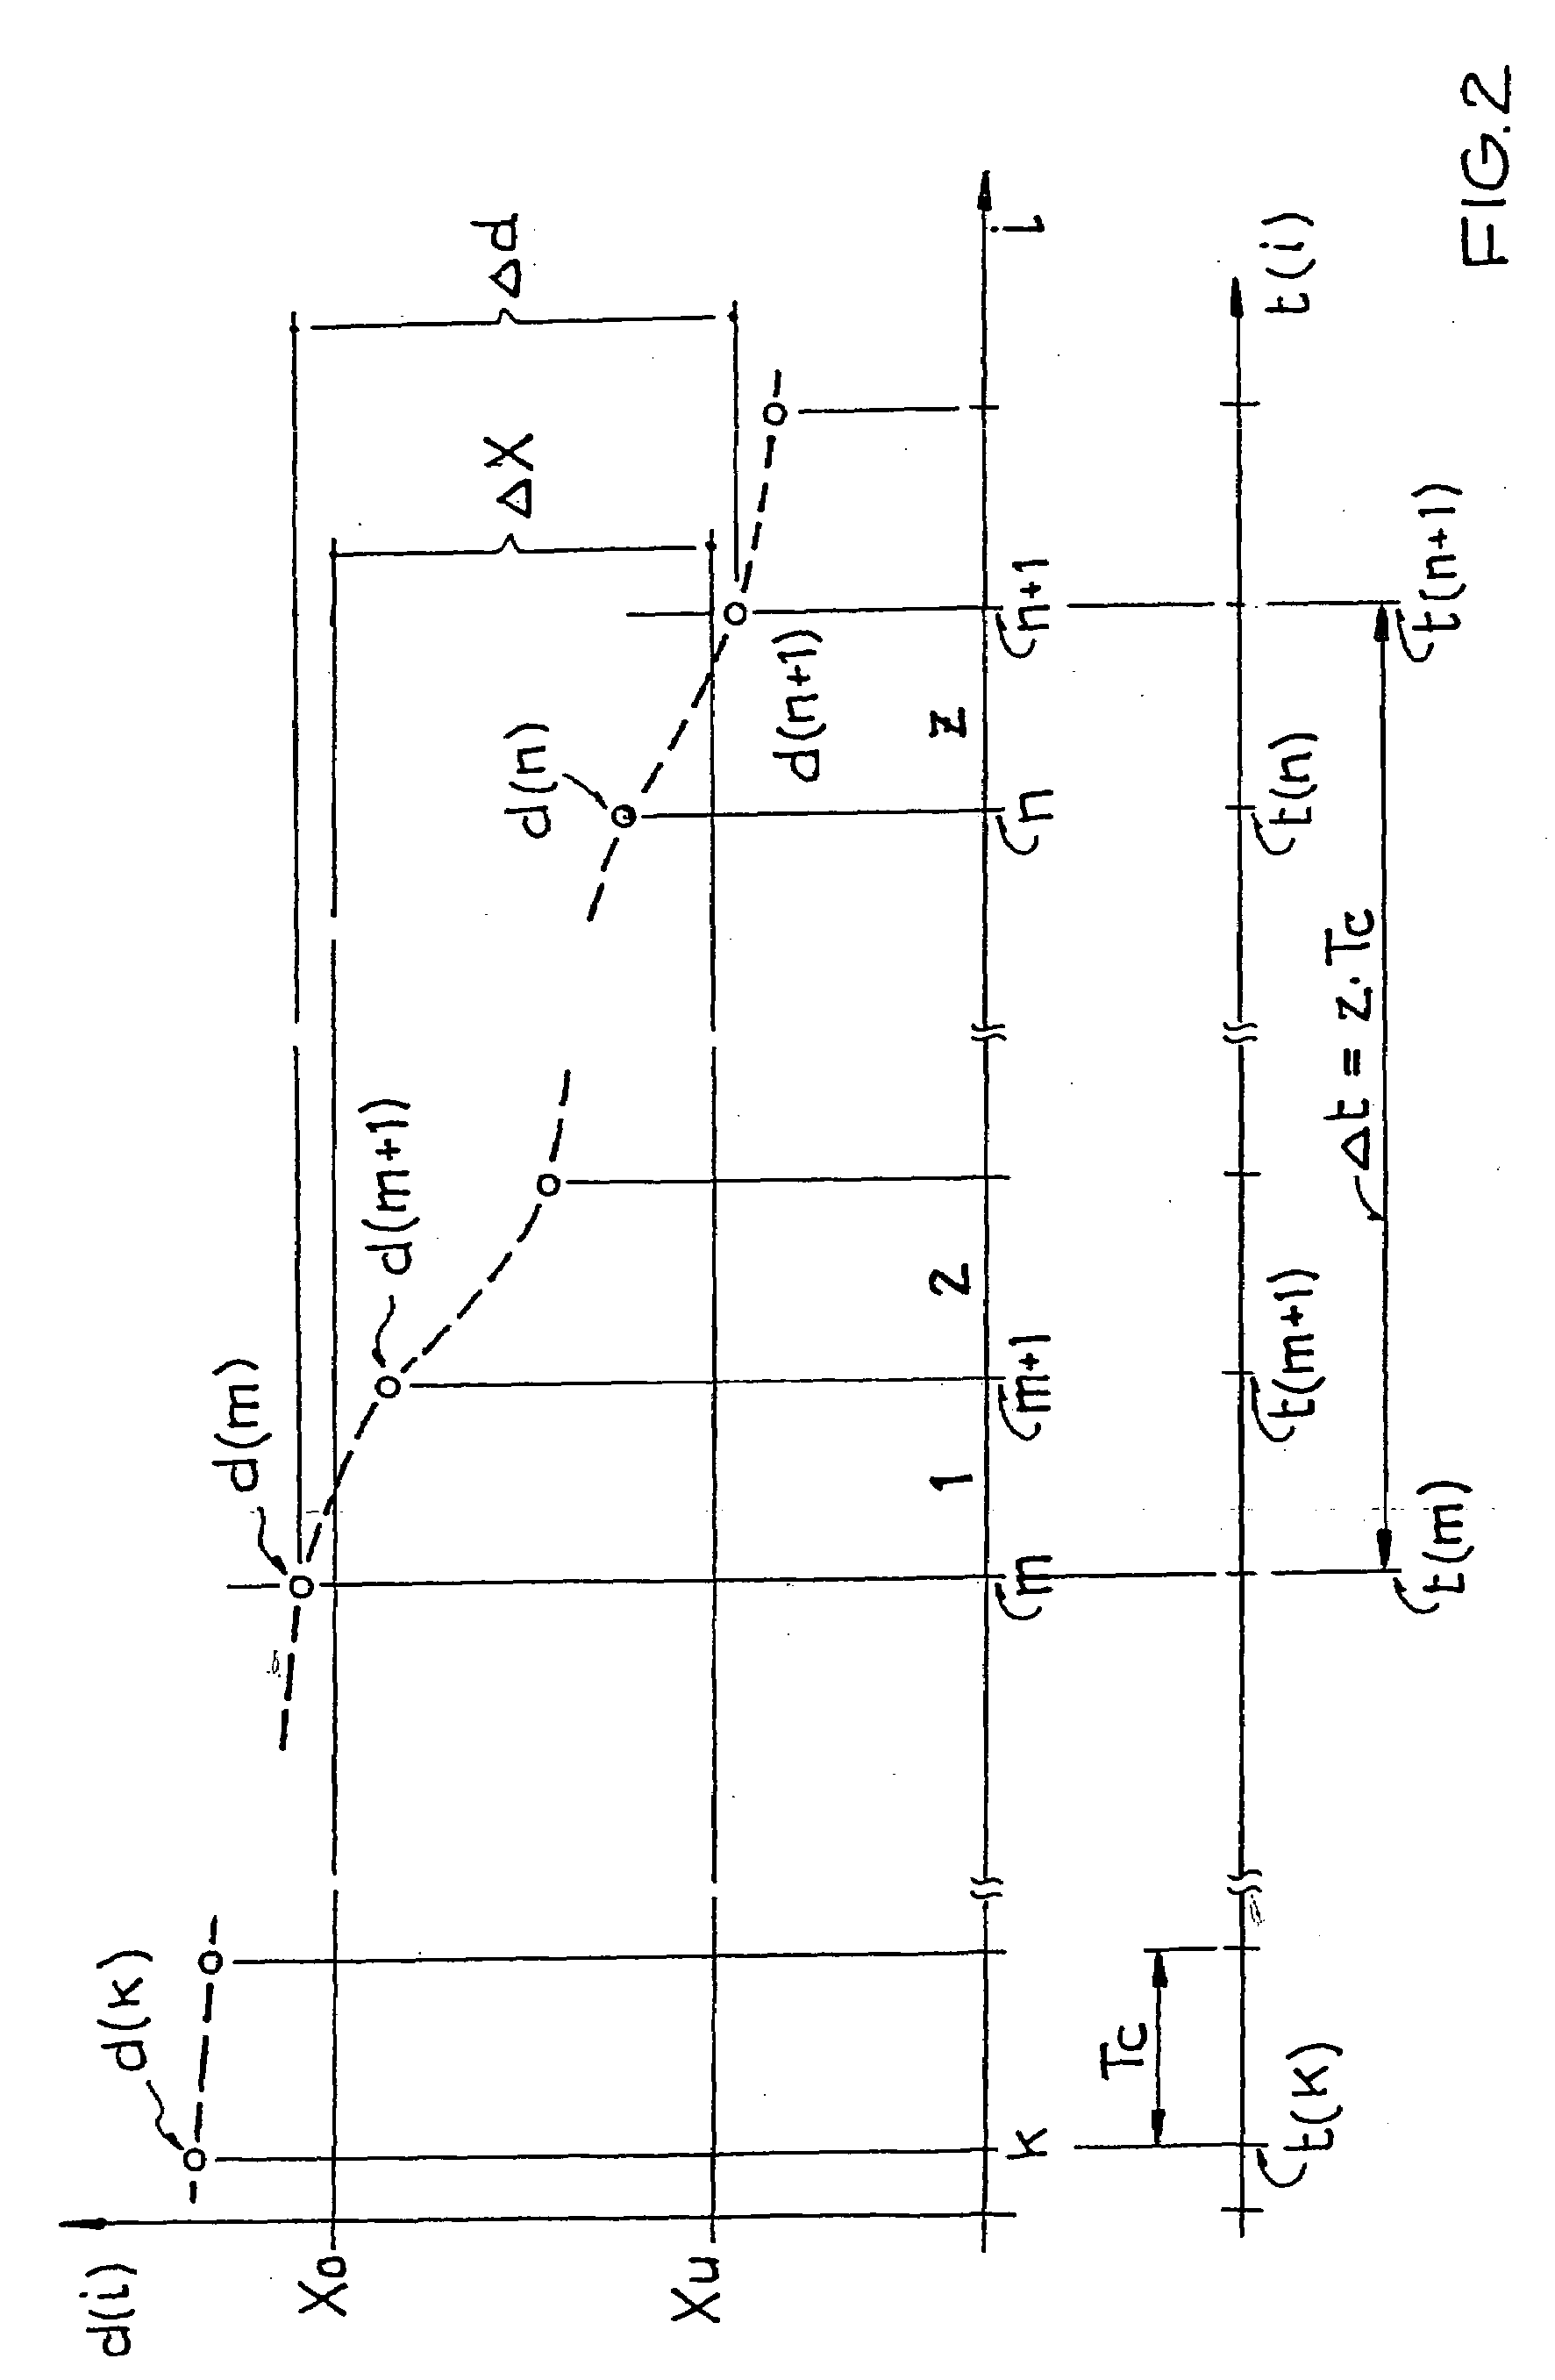 Method for determining the relative speed of an object